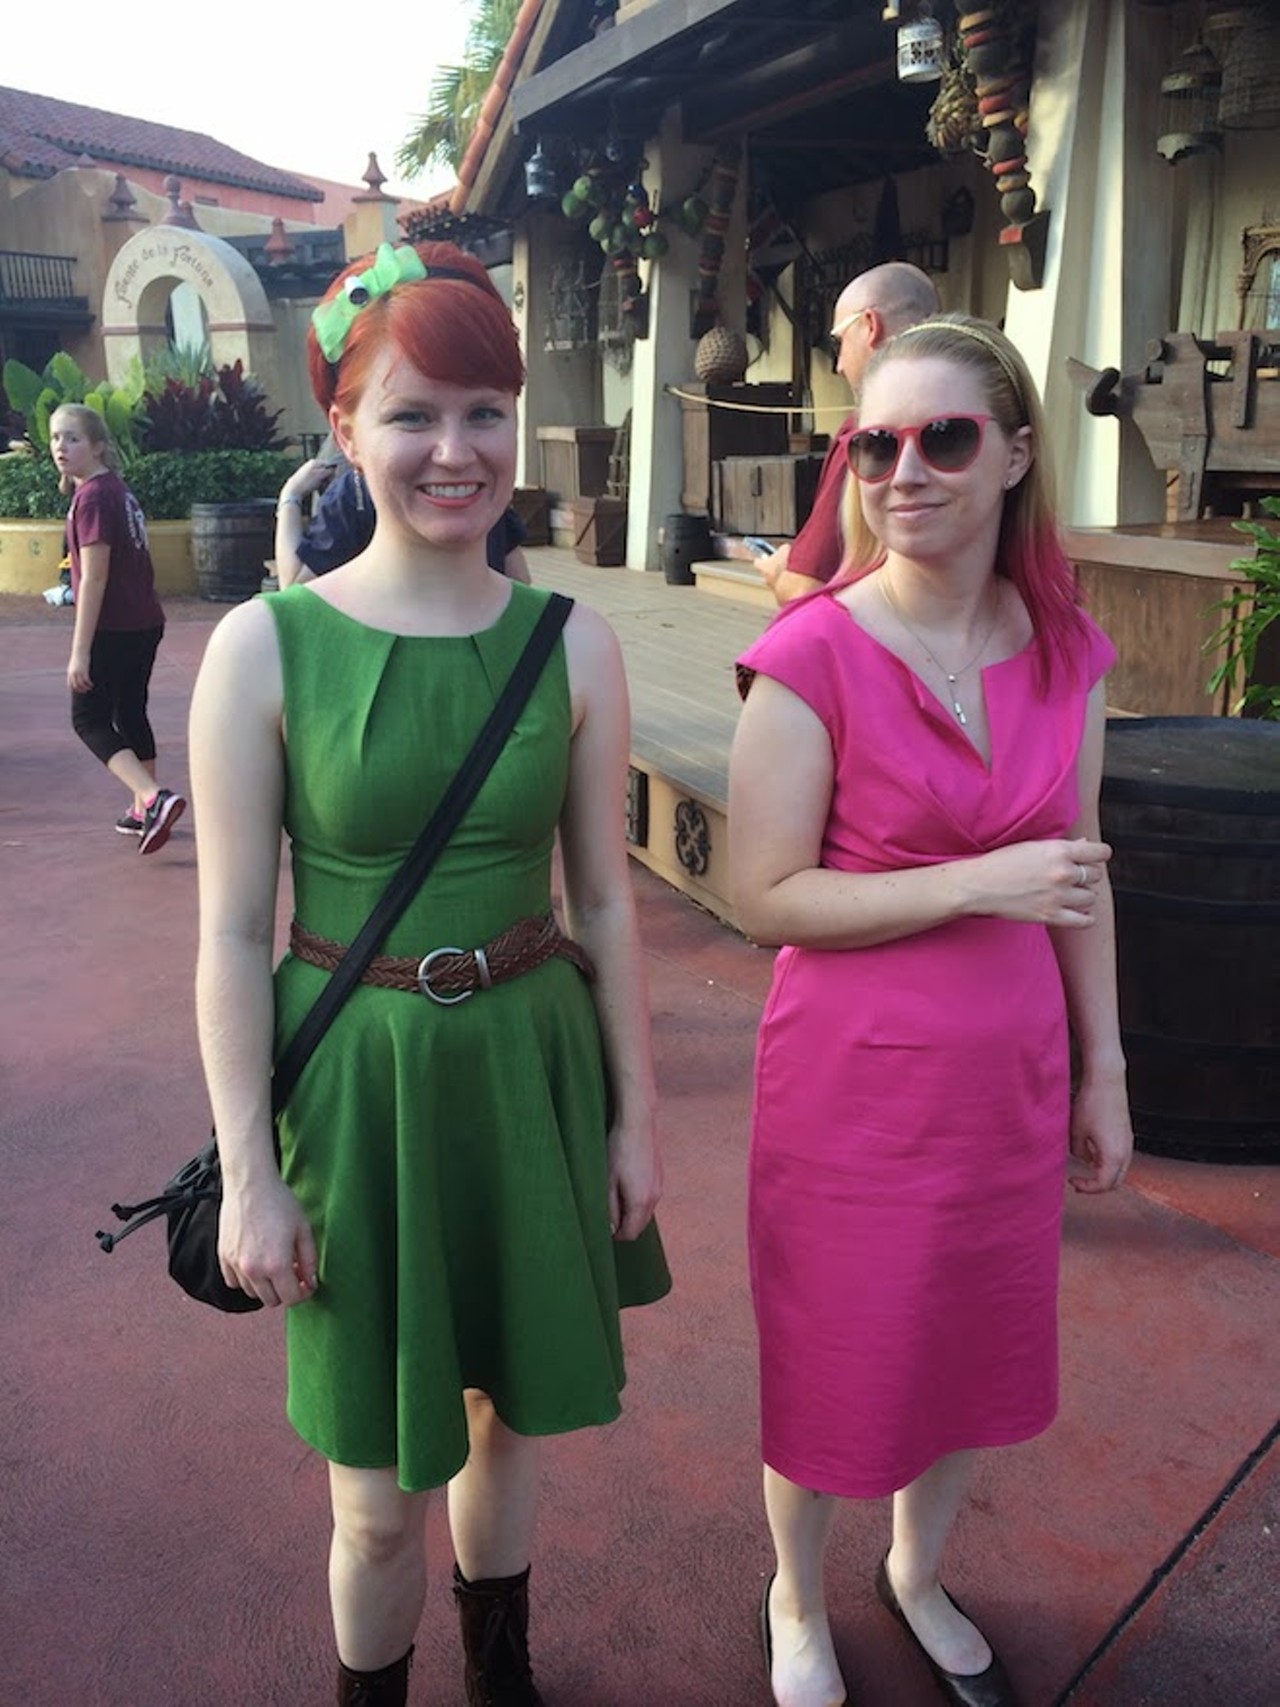 49 shots of sharp-dressed guests at Disney's Dapper Day